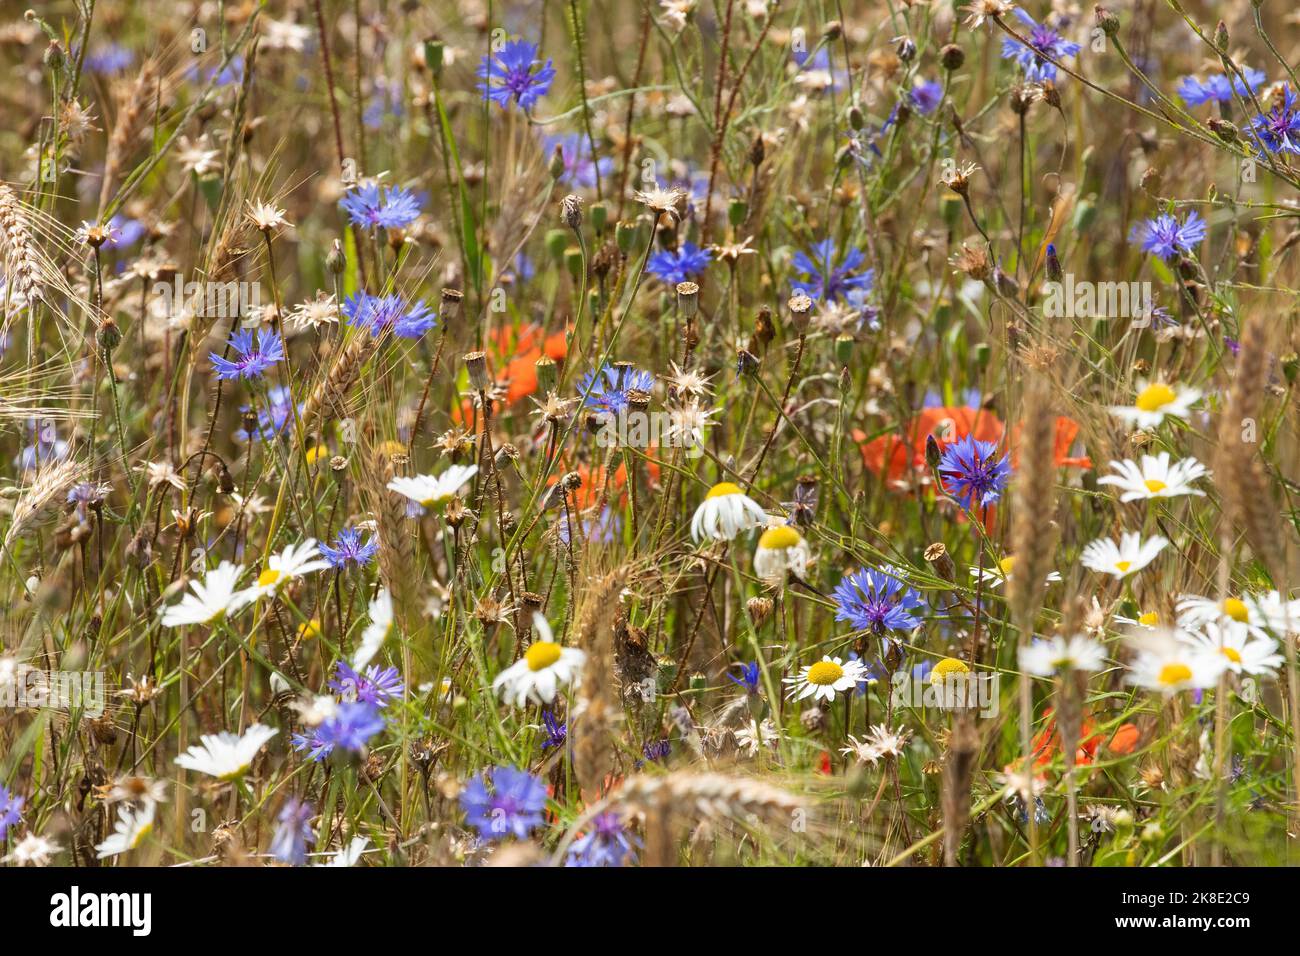 Field of blue, red and white-yellow wild herbs between cereal stalks Stock Photo